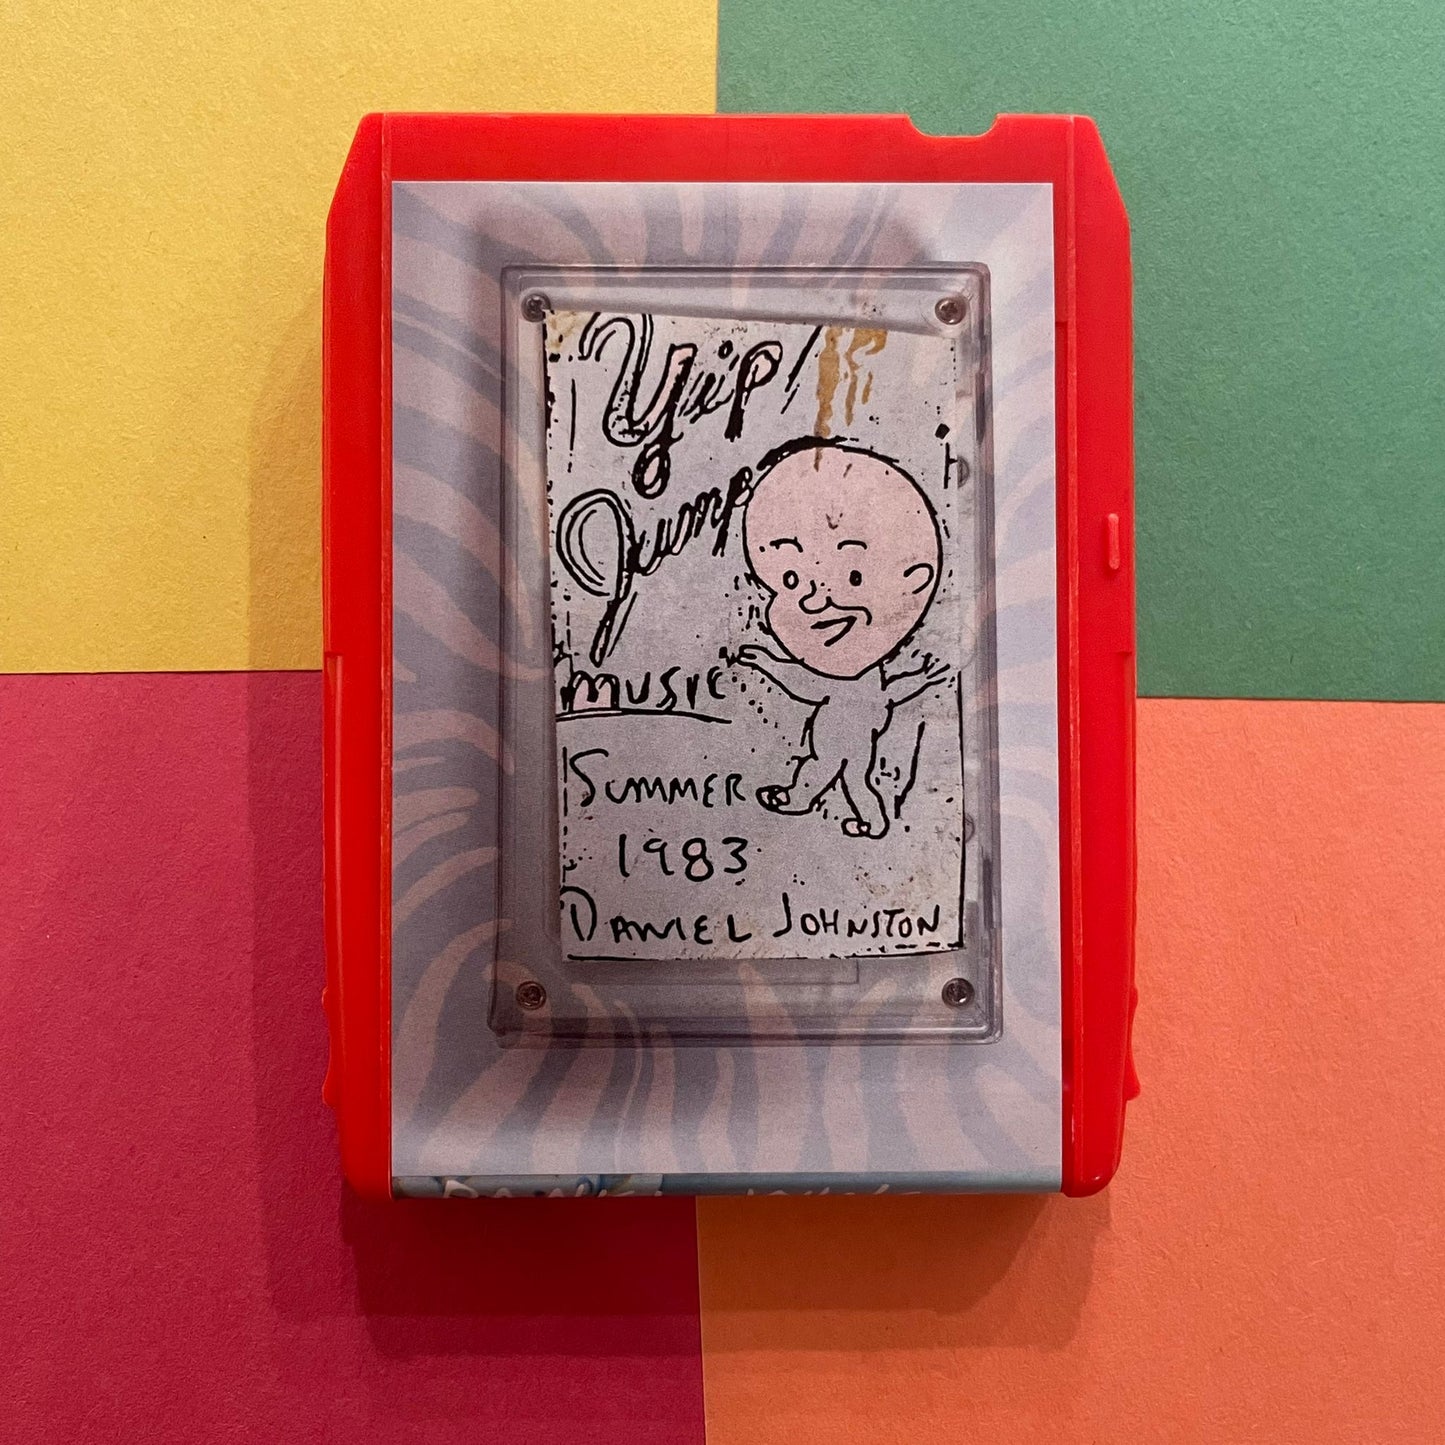 Daniel Johnston LIMITED NUMBERED 8 track stereo cartridge albums